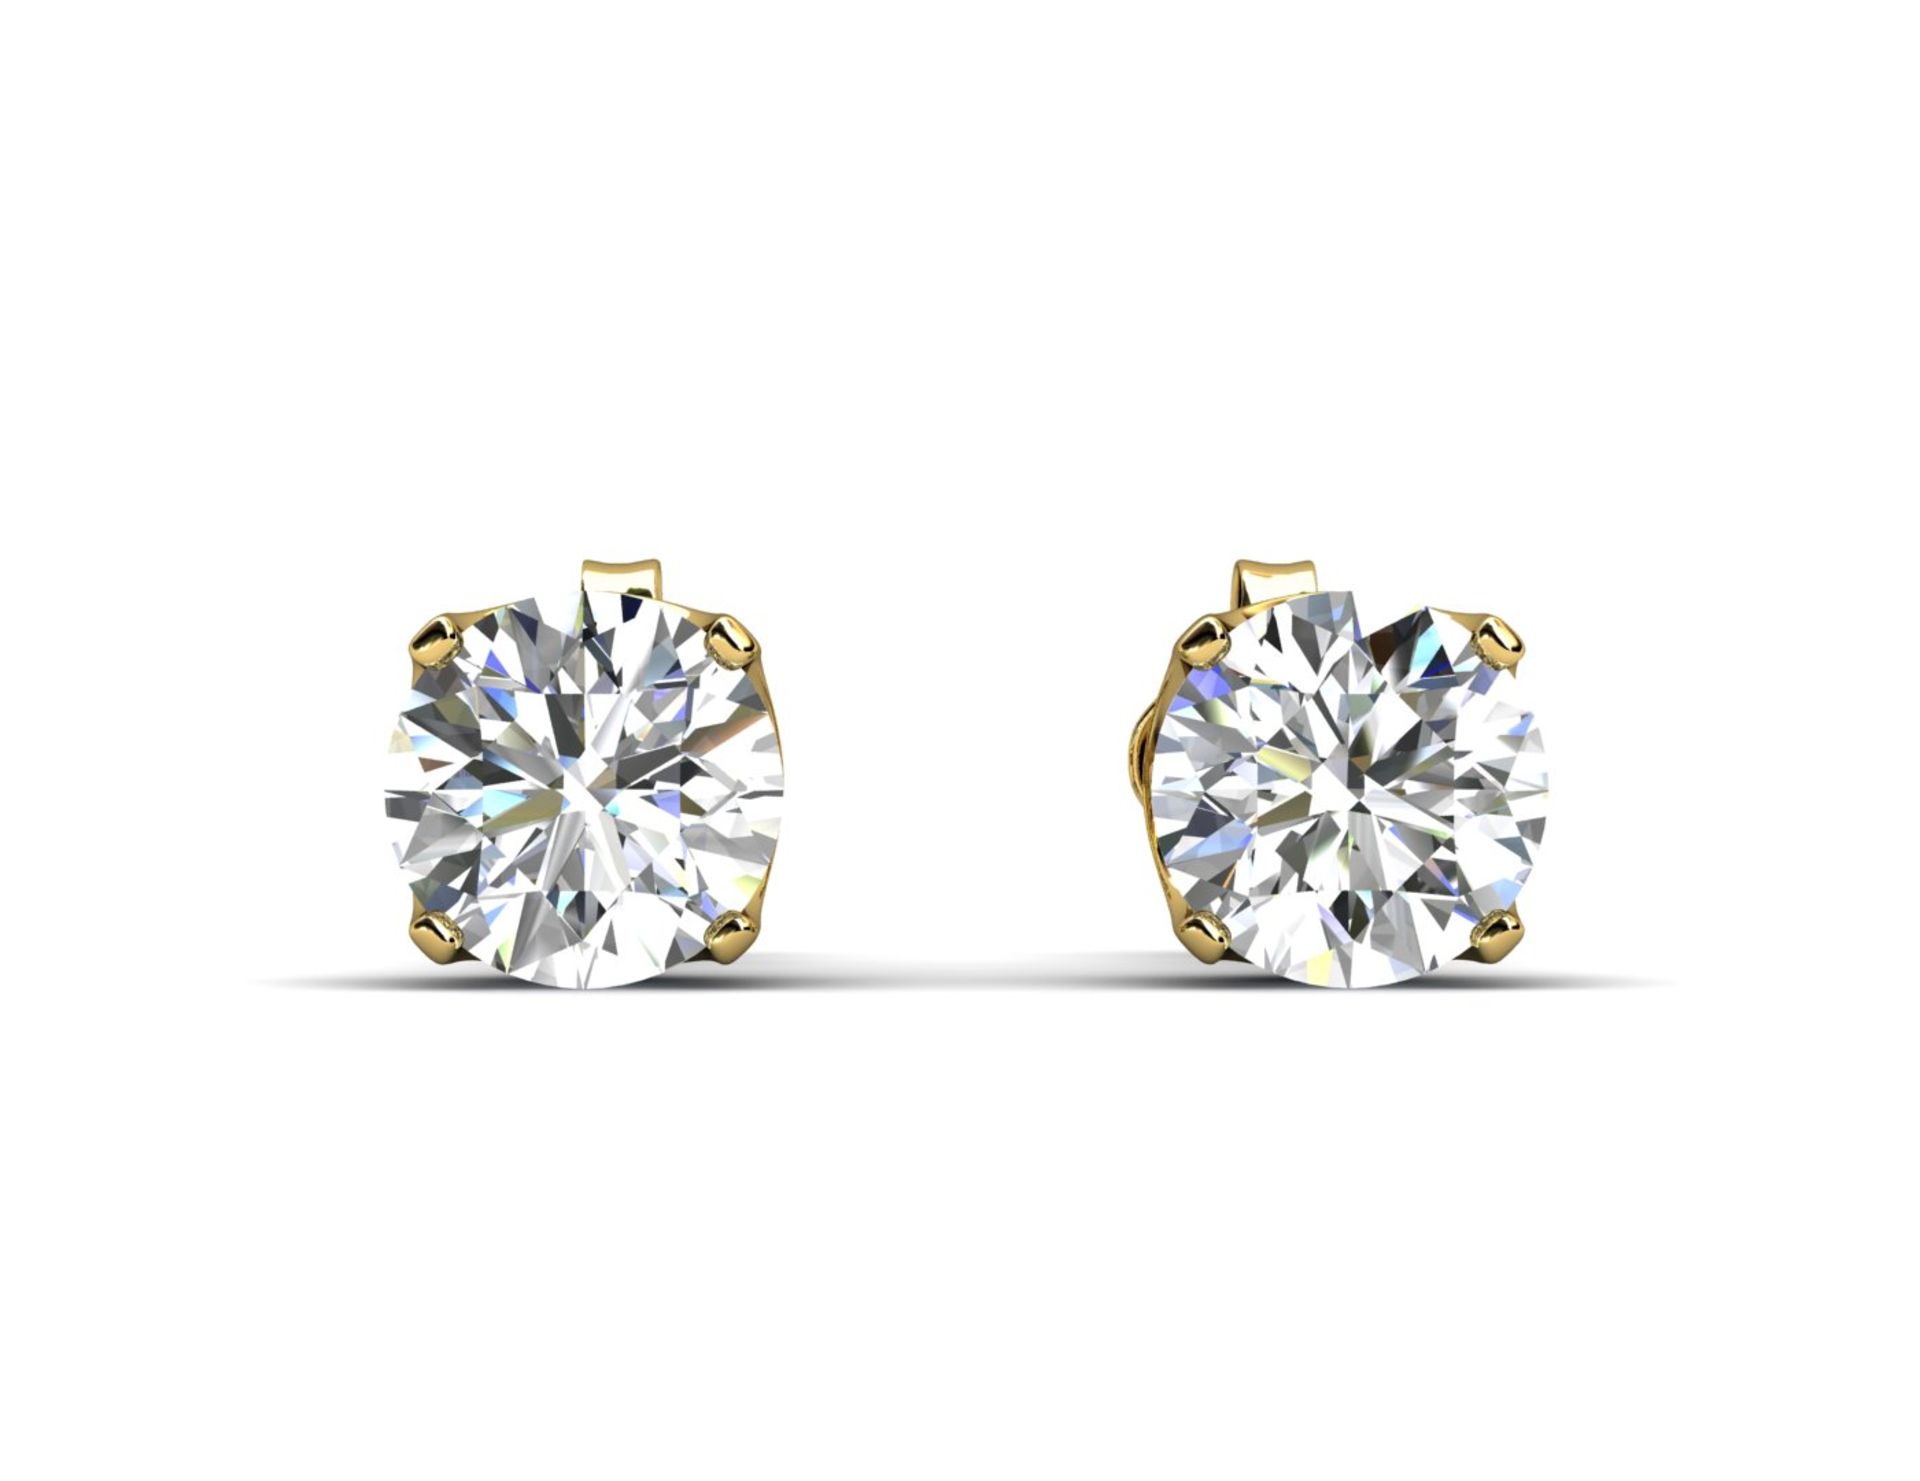 9ct Single Stone Four Claw Set Diamond Earring 0.10 Carats - Valued by GIE £523.00 - 9ct Single